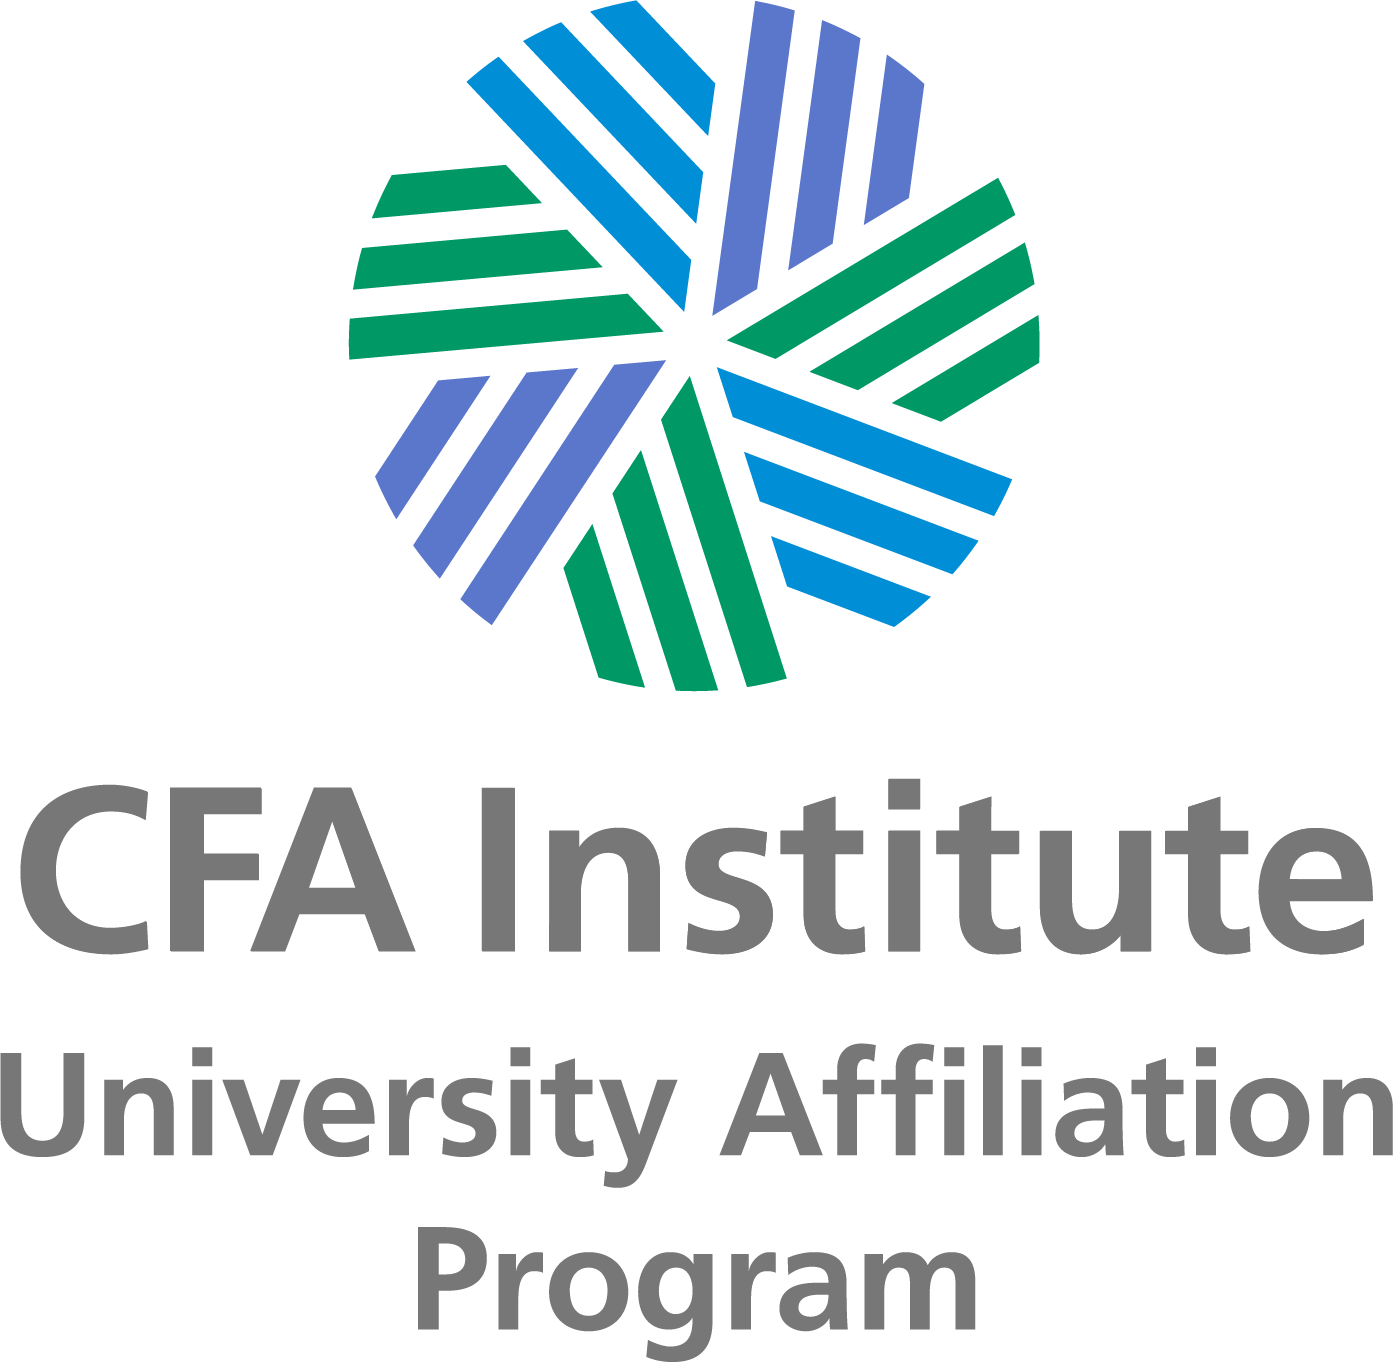 BSc Finance in Prince Sultan University joins the CFA University affiliation